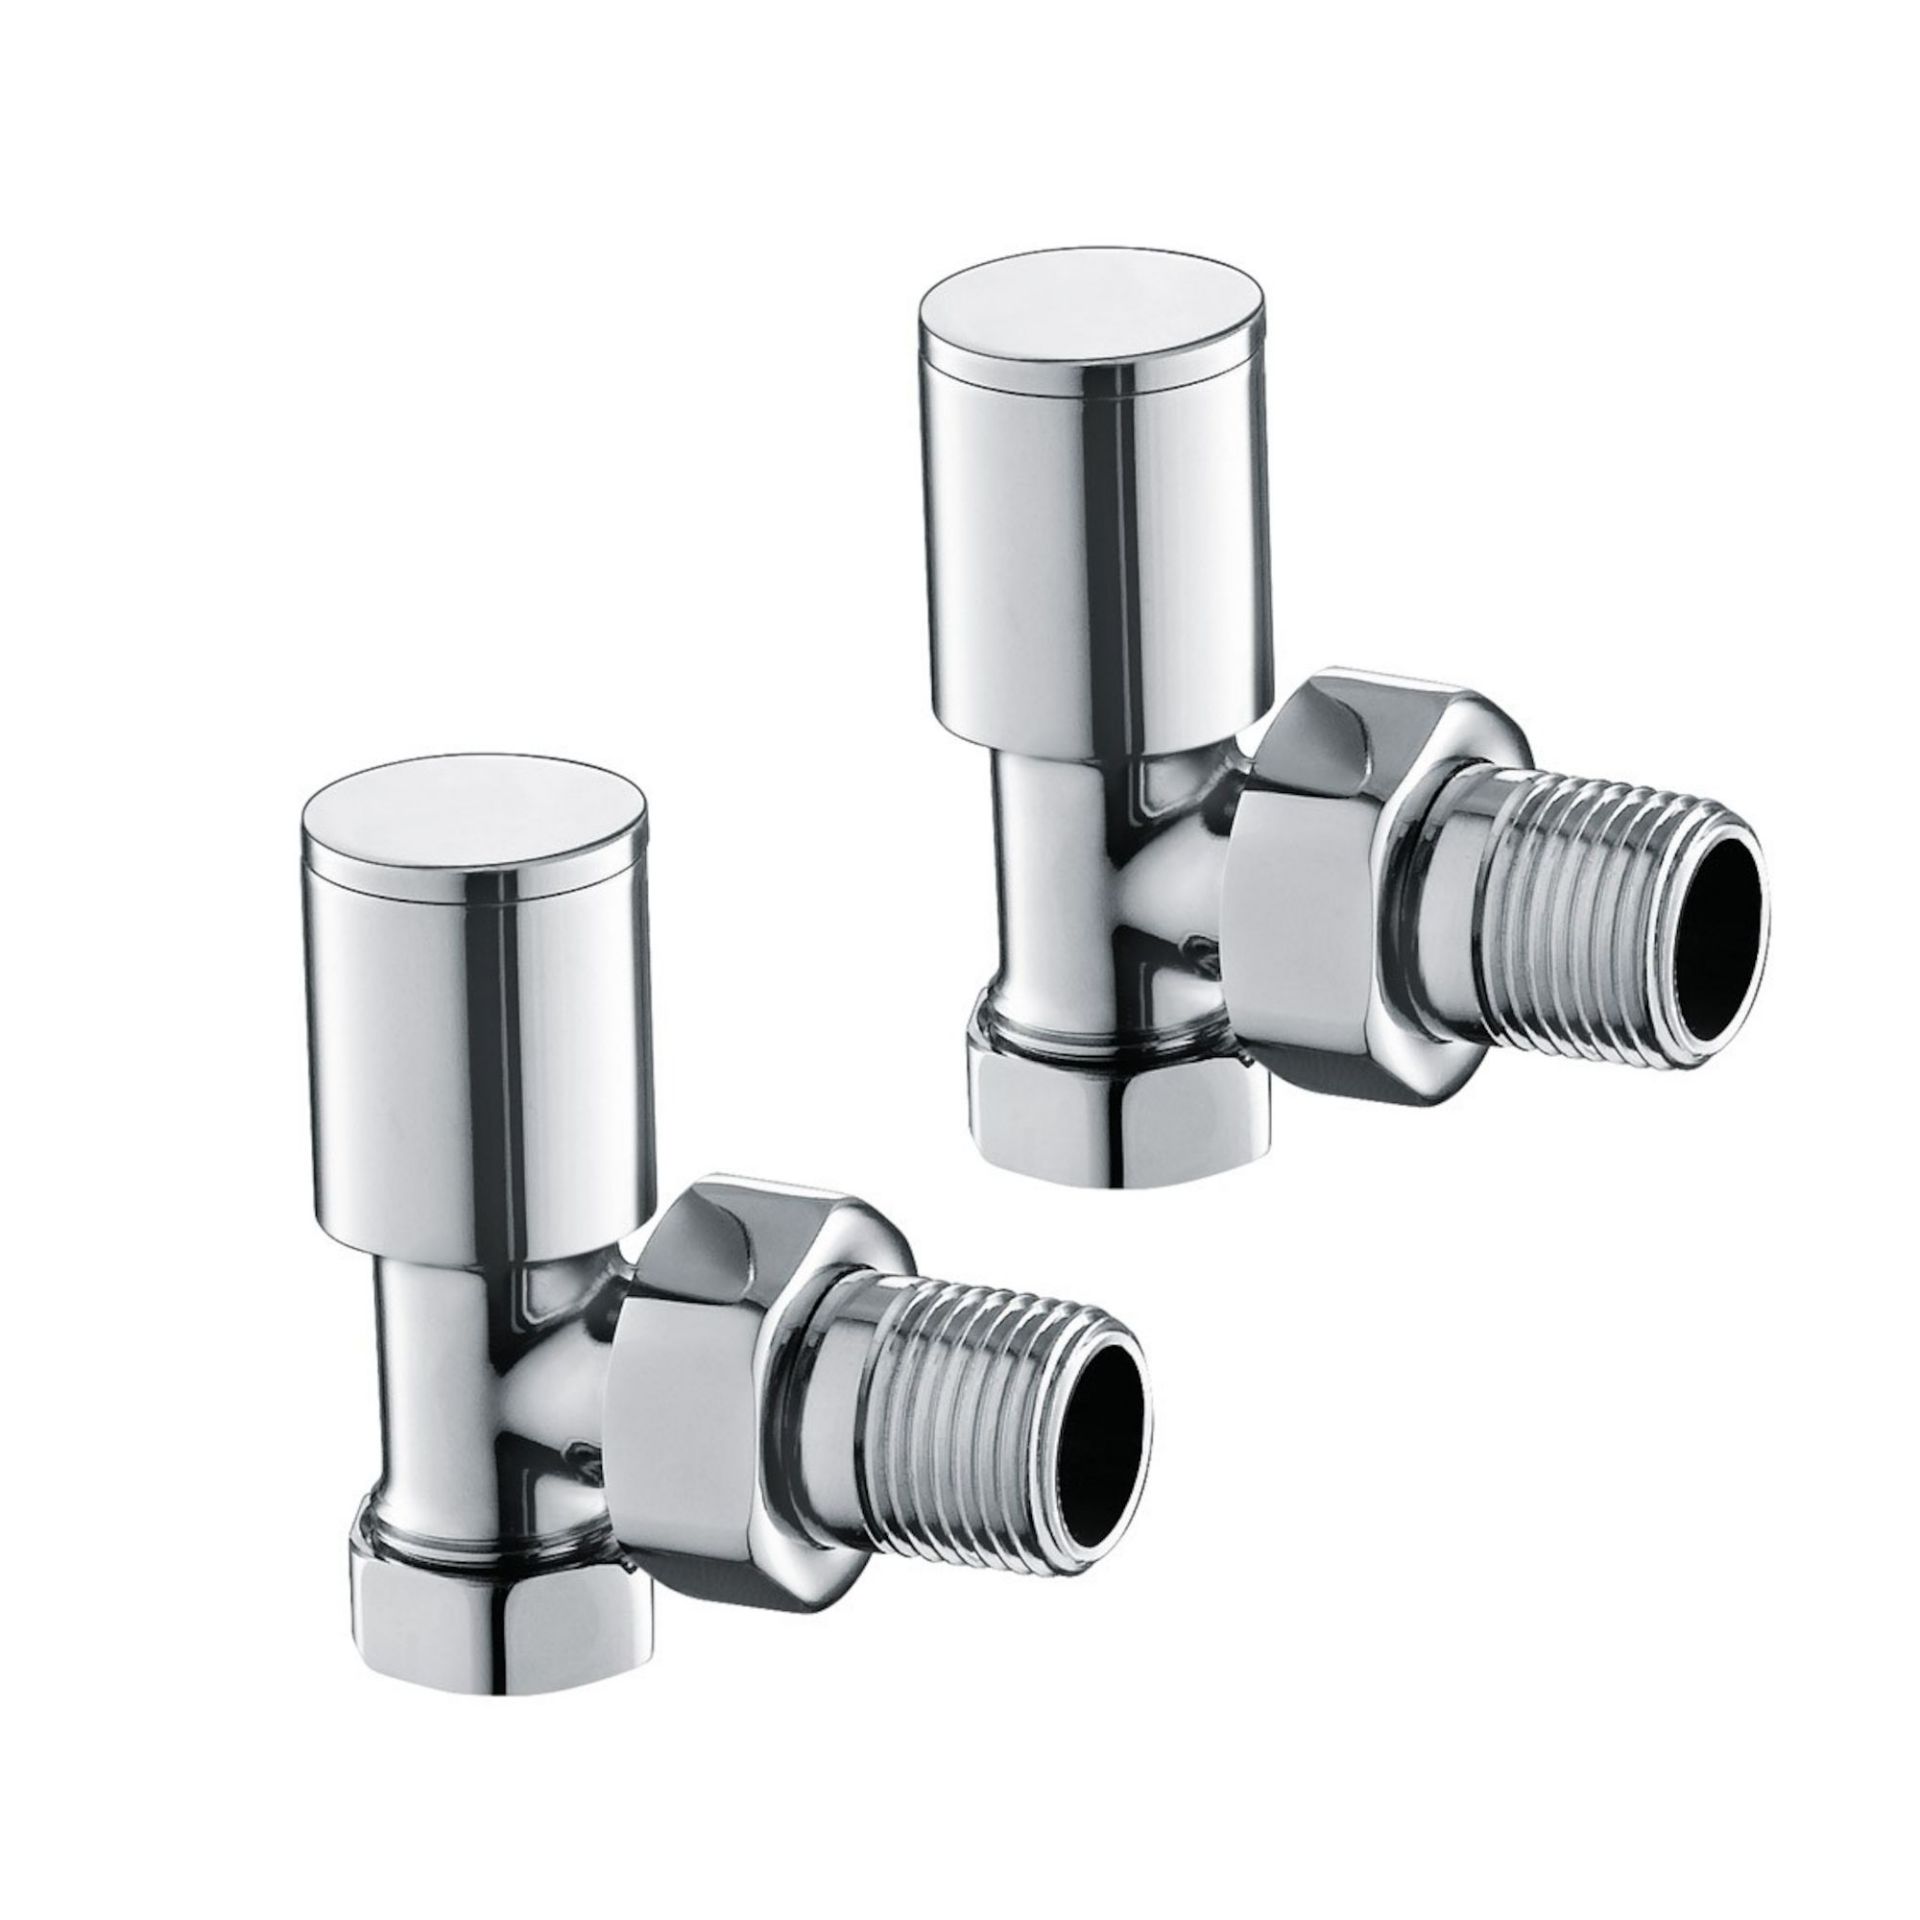 (XS165) 15mm Standard Connection Angled Radiator Valves - Heavy Duty Polished Chrome Plated Brass - Image 2 of 2